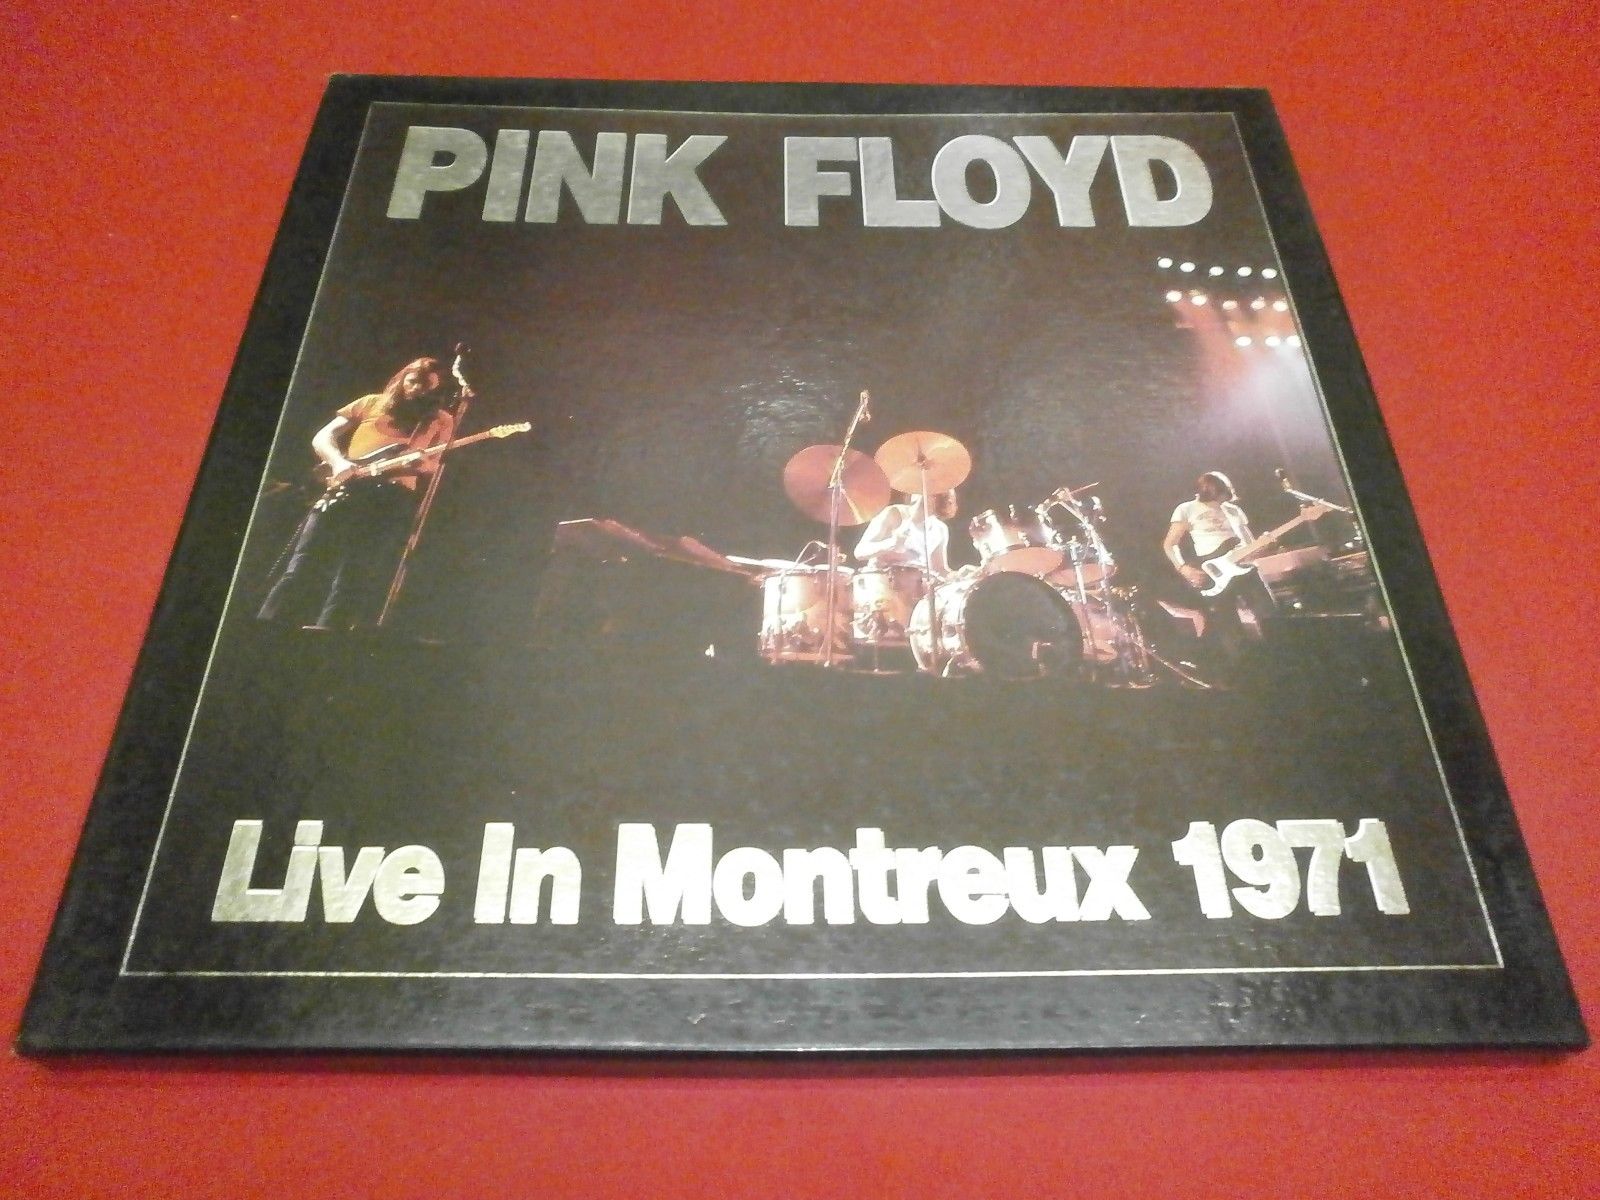 Pink Floyd / Live in Montreux 1971 BOX 3 LP Rosa 1990 Very very rare